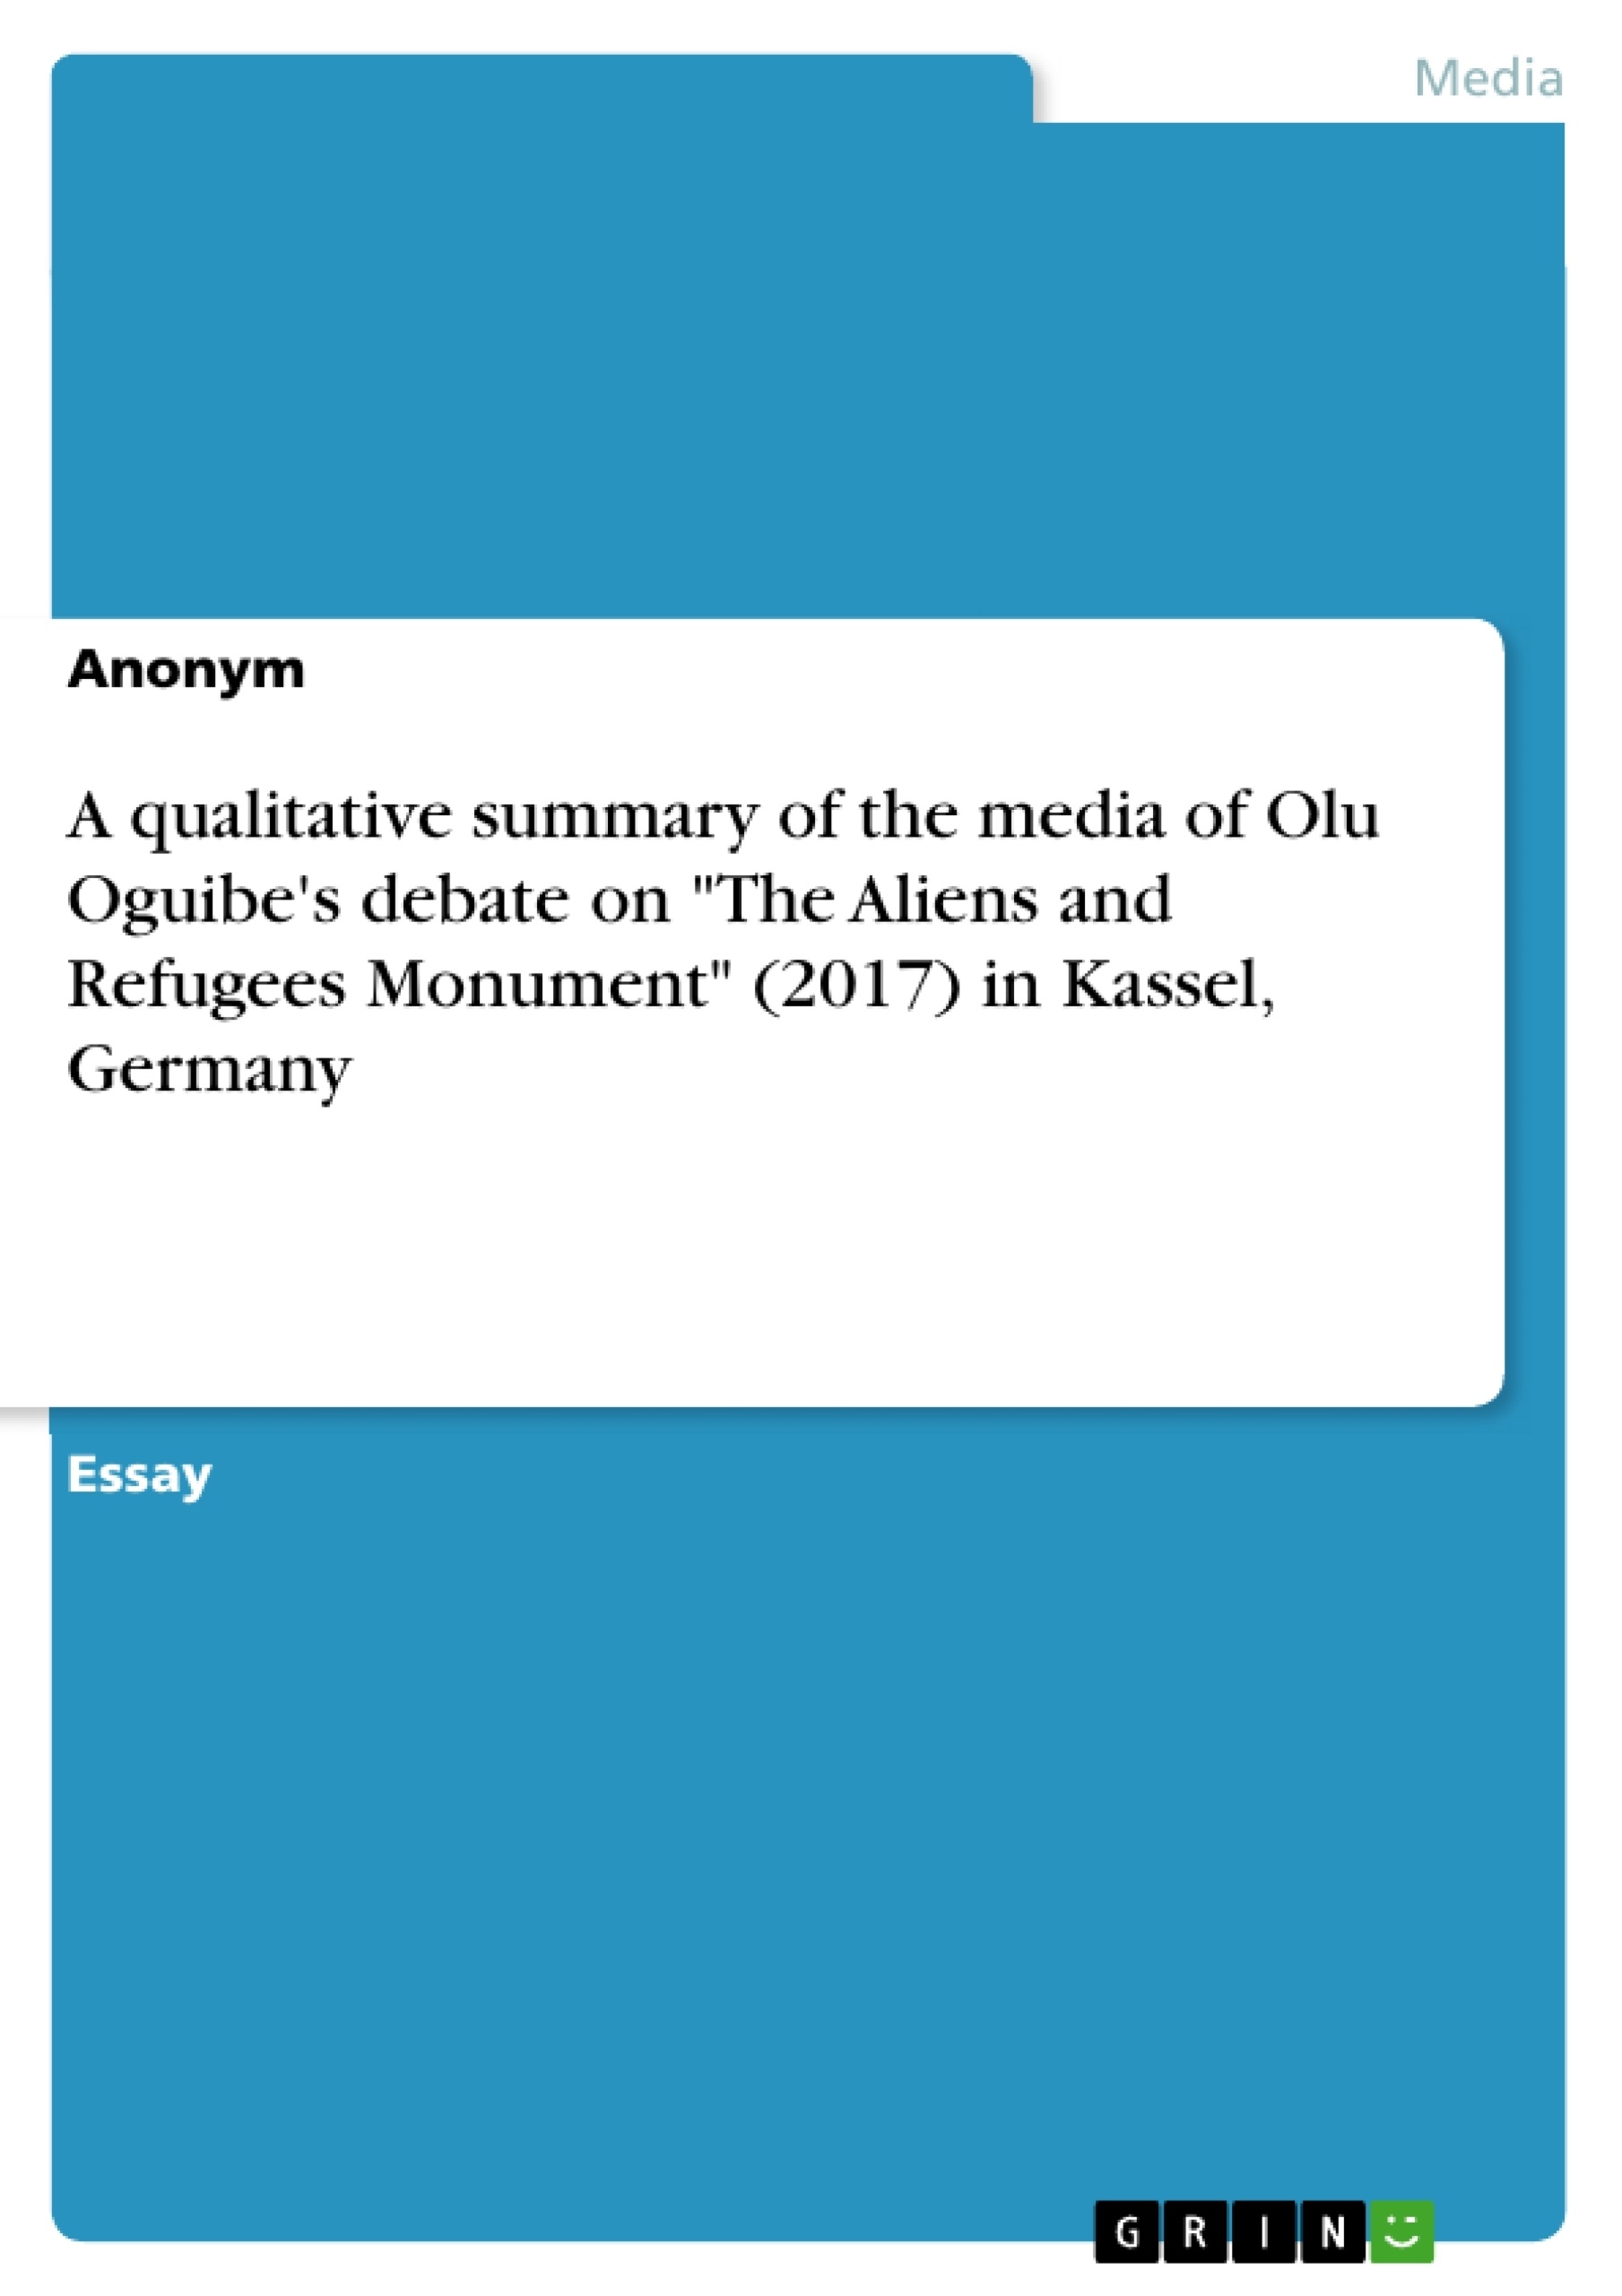 Title: A qualitative summary of the media of Olu Oguibe's debate on "The Aliens and Refugees Monument" (2017) in Kassel, Germany